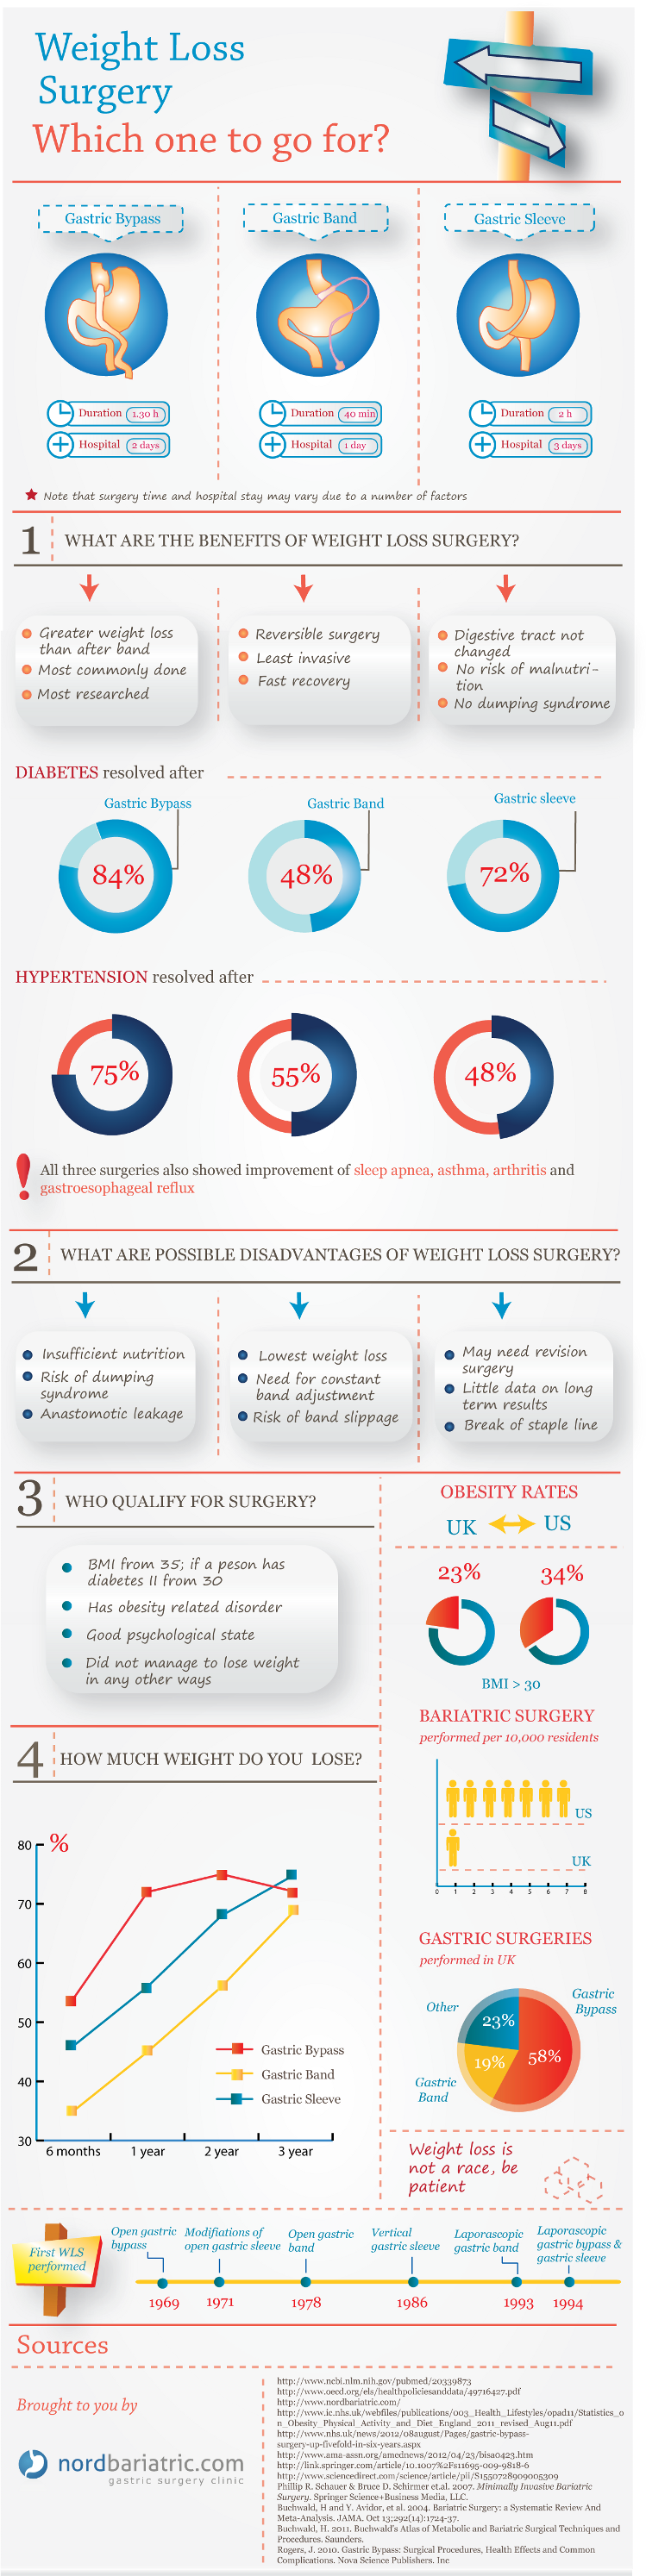 Comparison of Weight Loss Surgeries